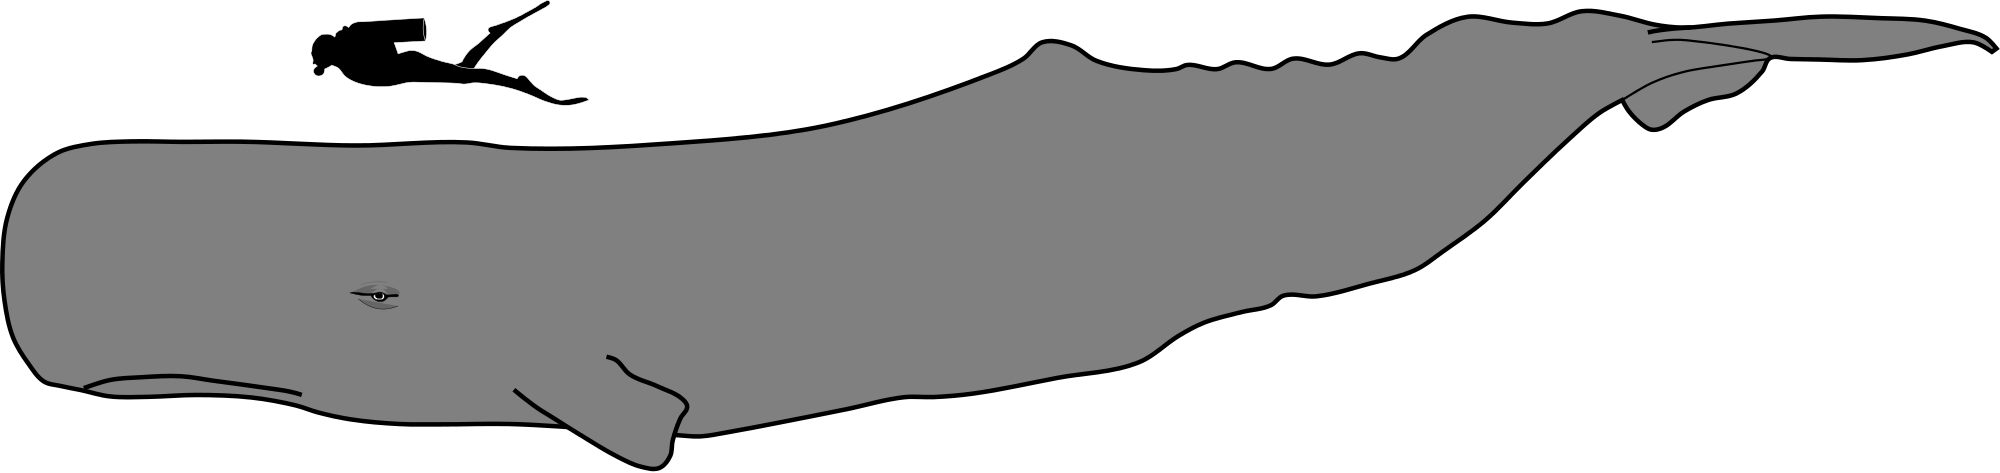 Sperm Whale svg #20, Download drawings